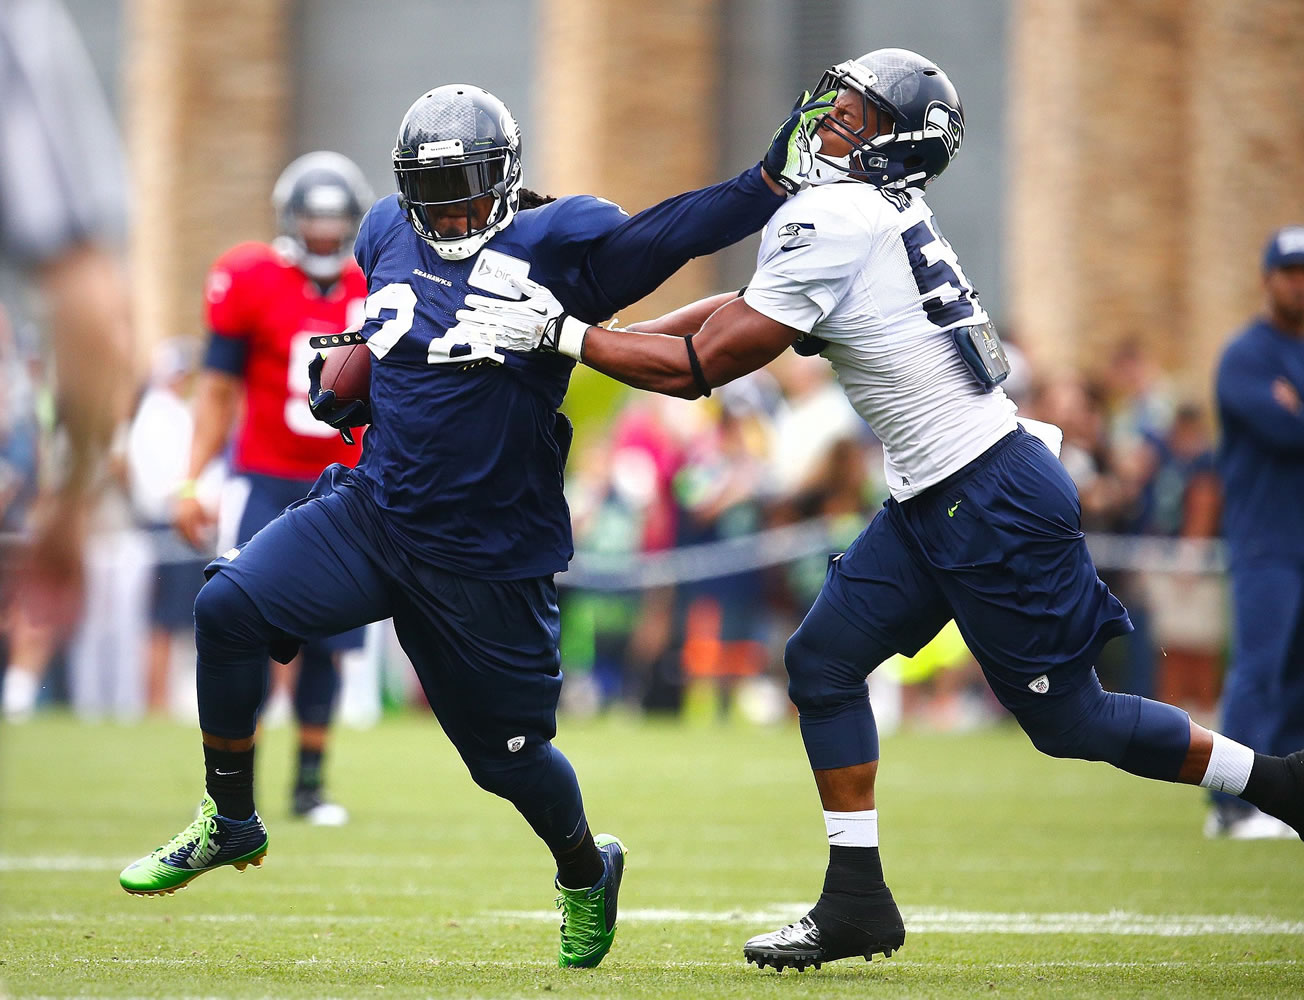 Seattle Times photo
Seattle Seahawks running back Marshawn Lynch, left, lays a stiff arm on linebacker Marcus Dowtin during training camp Tuesday  in Renton. After talking to the running back, the Seahawks said the assault allegations against Lynch are without merit.